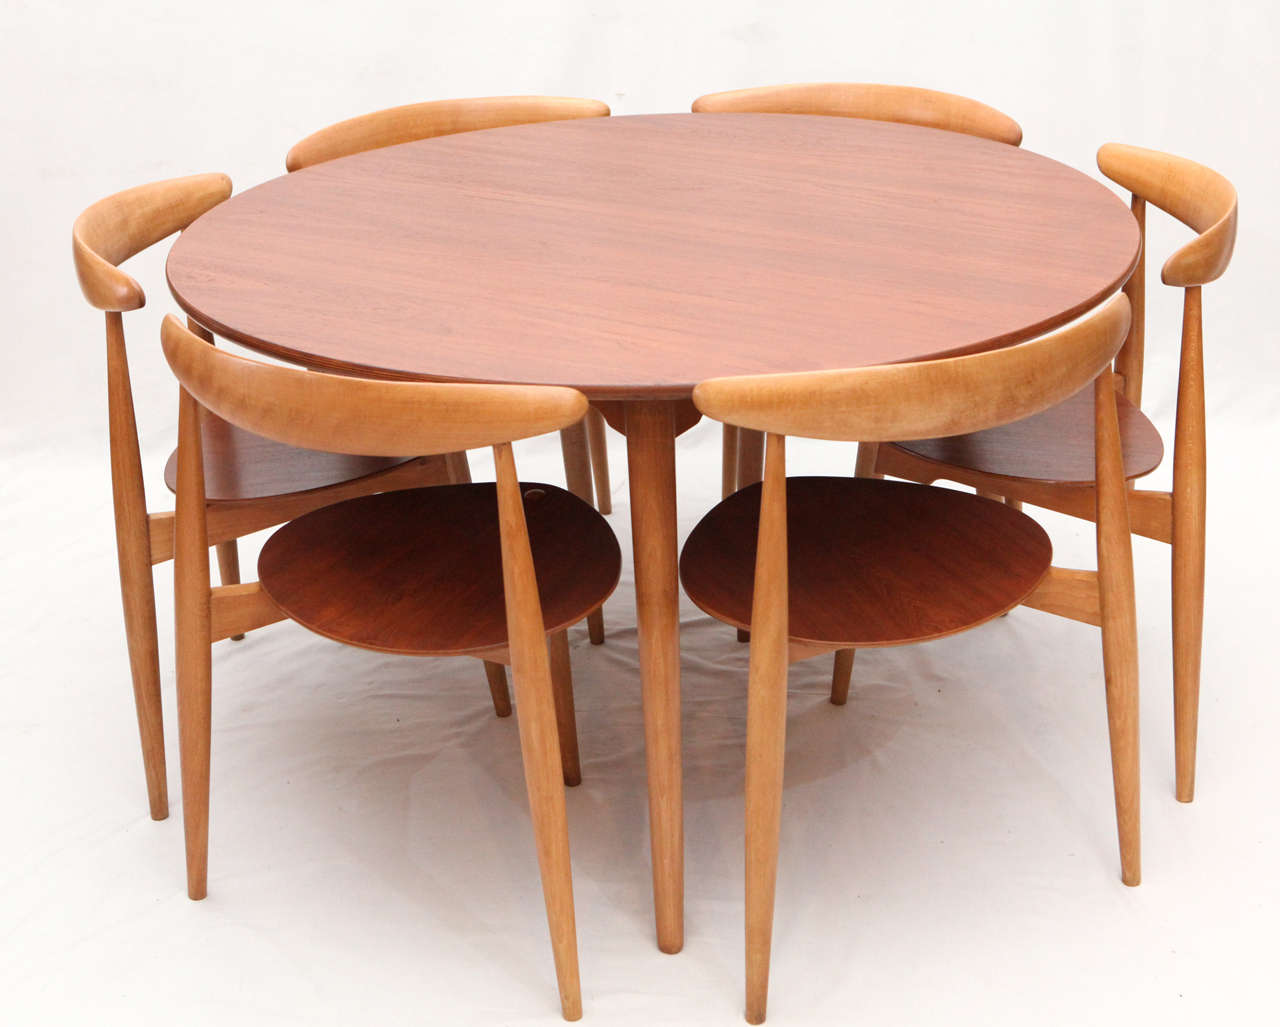 Hans Wegner three leg table with matching three leg chairs designed in 1953 and produced by Fritz Hansen.